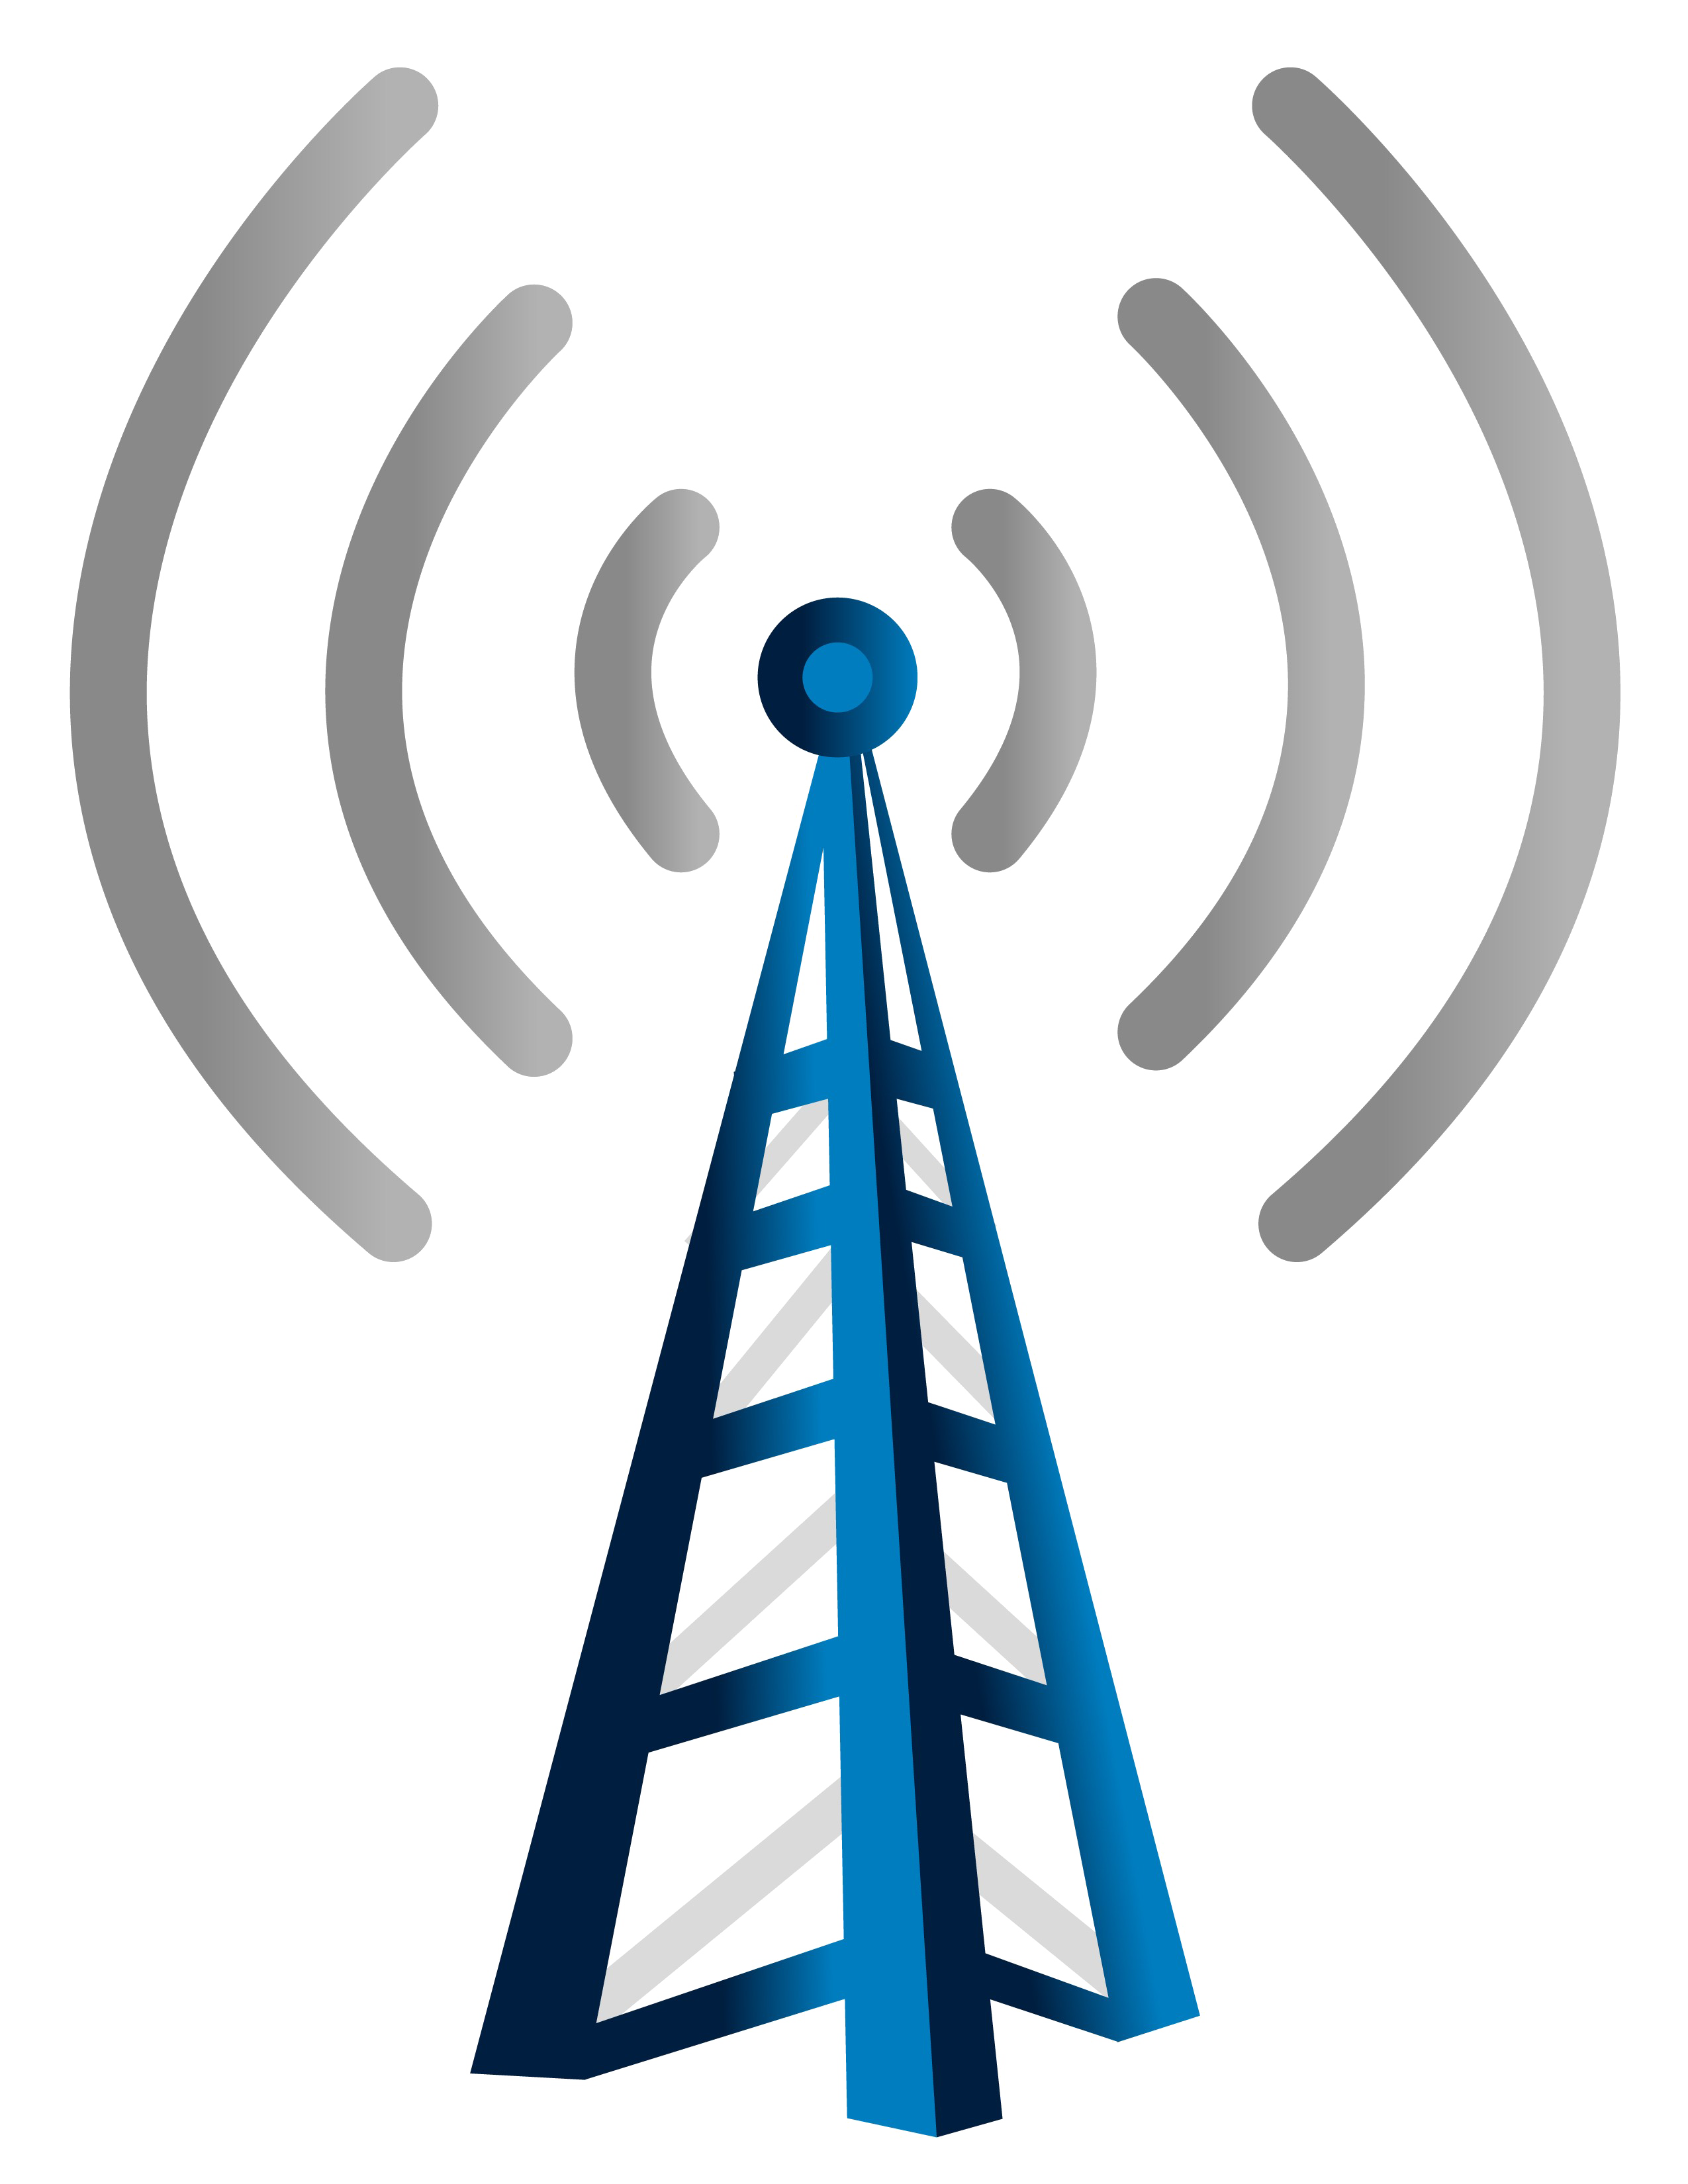 Communication Tower PNG Image High Quality PNG Image